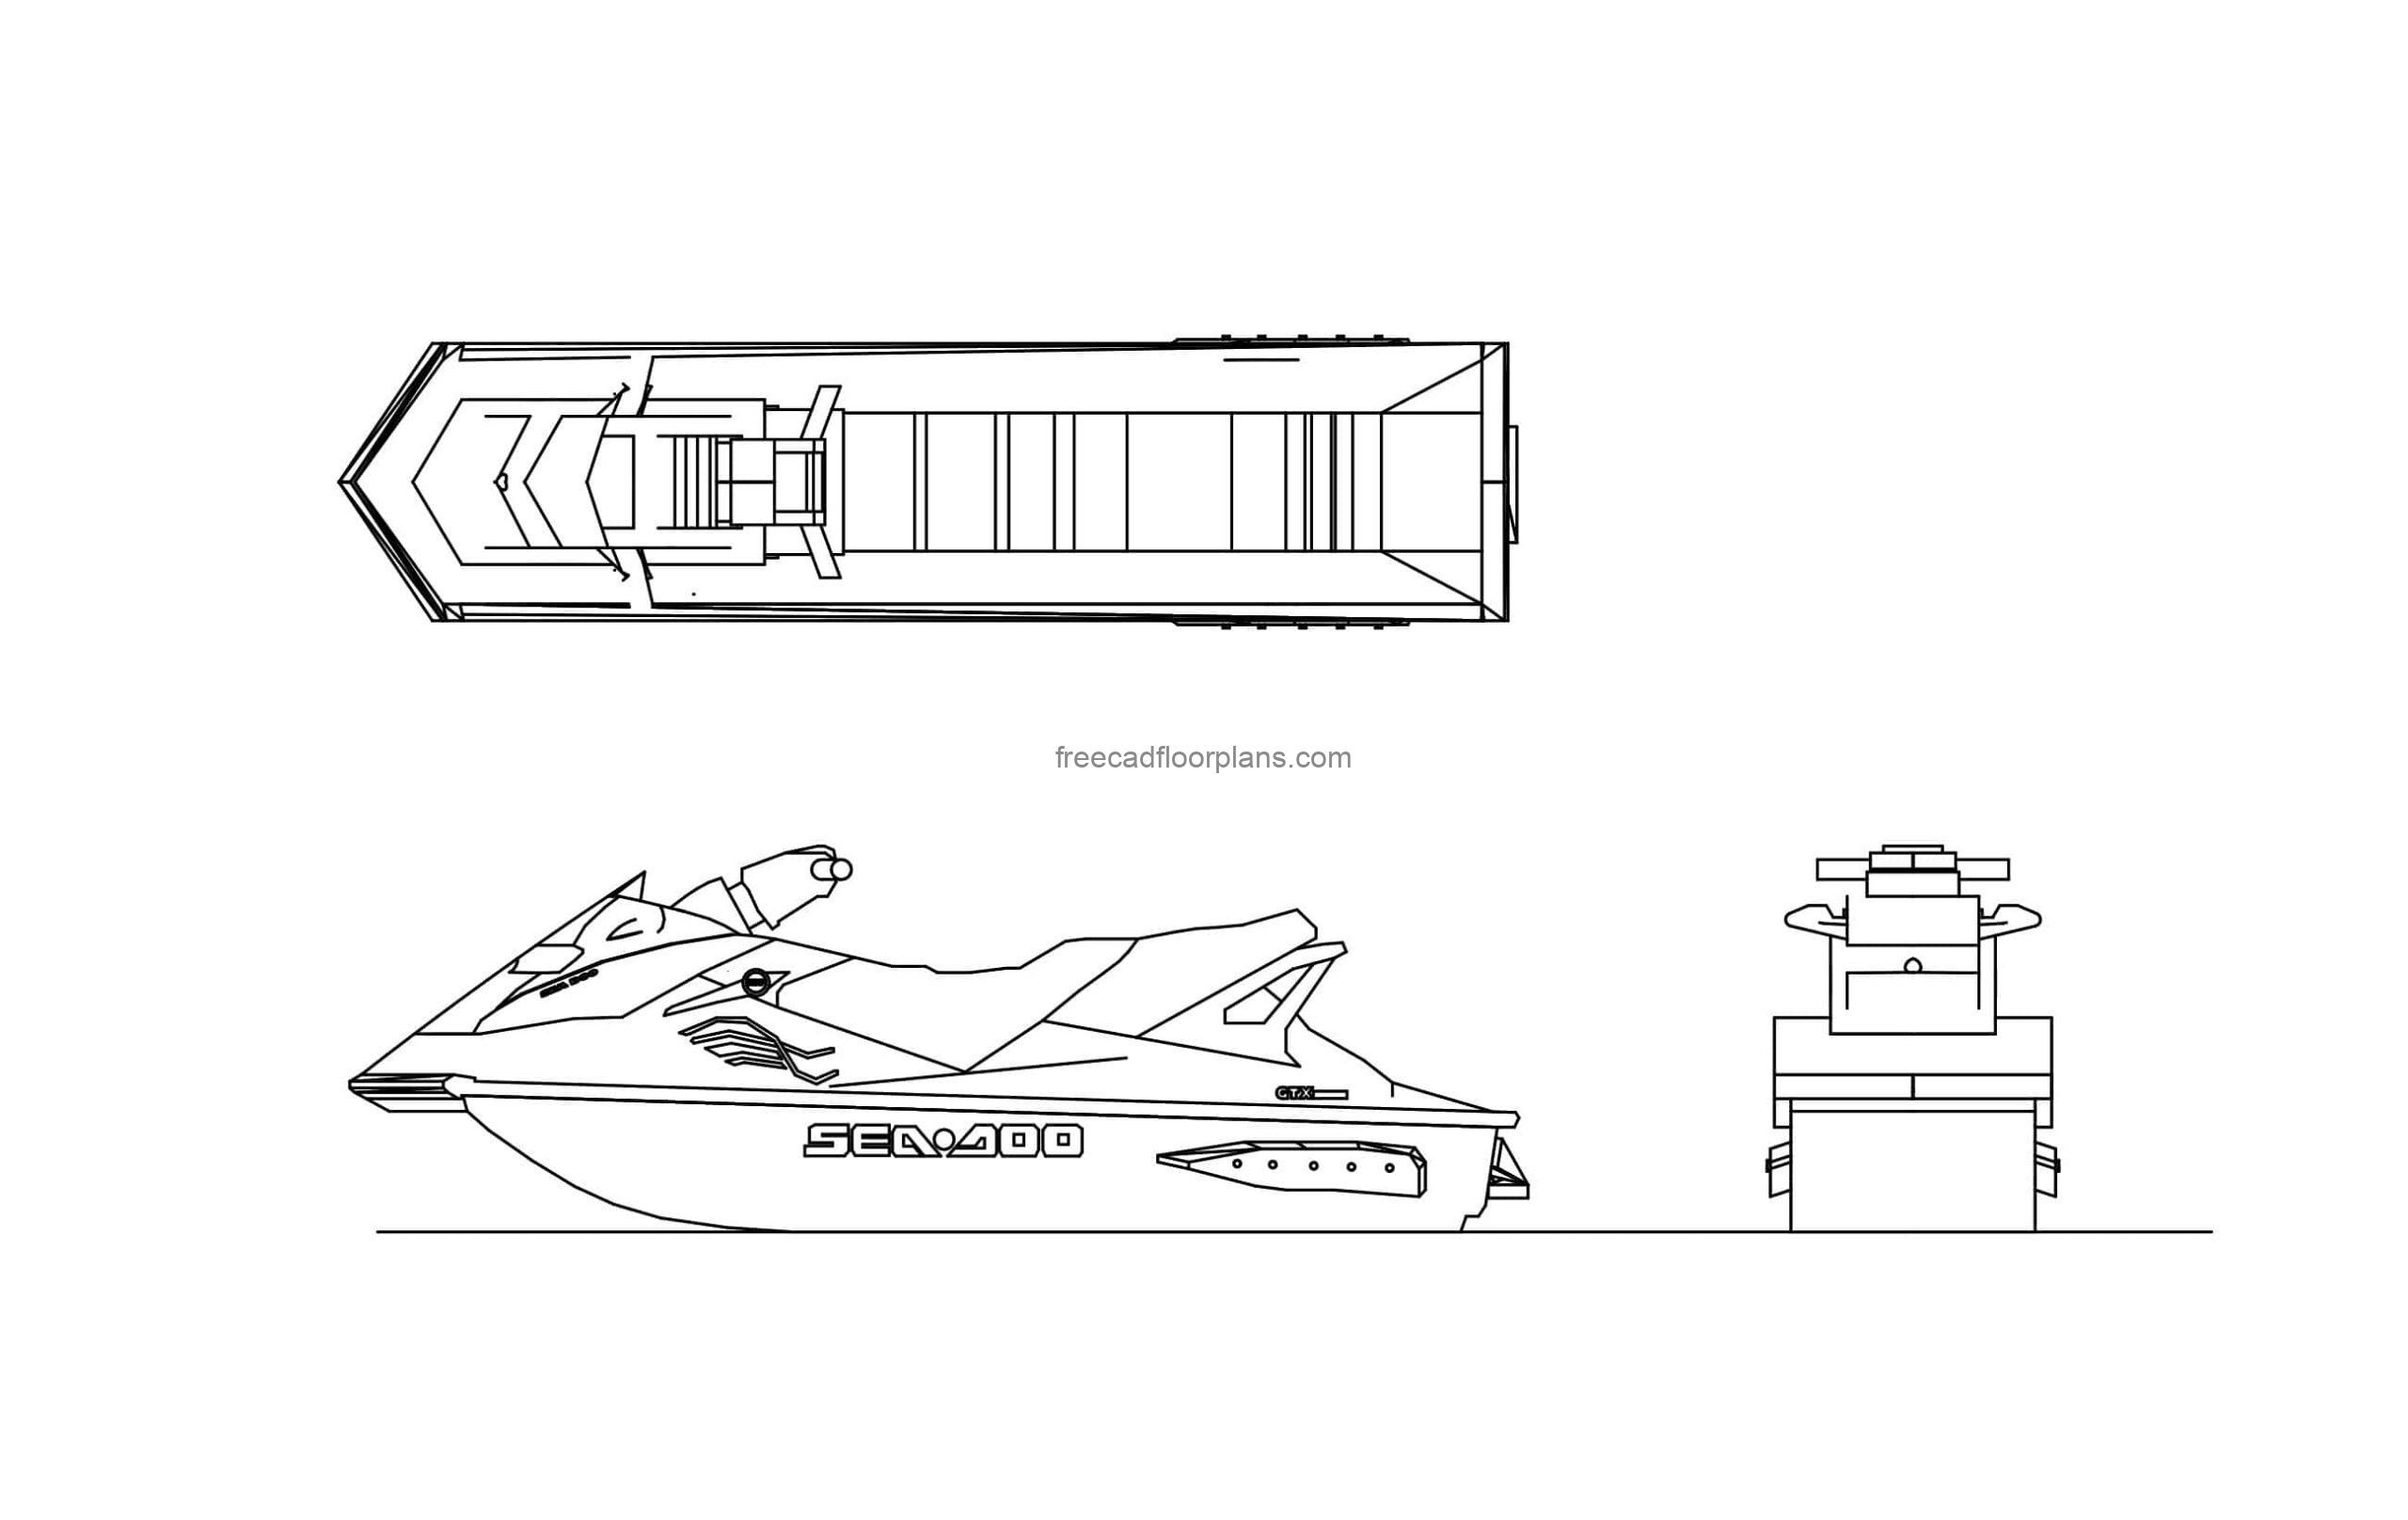 drawing of a jet ski sea doo all 2d views, plan, front and side elevation free file for download